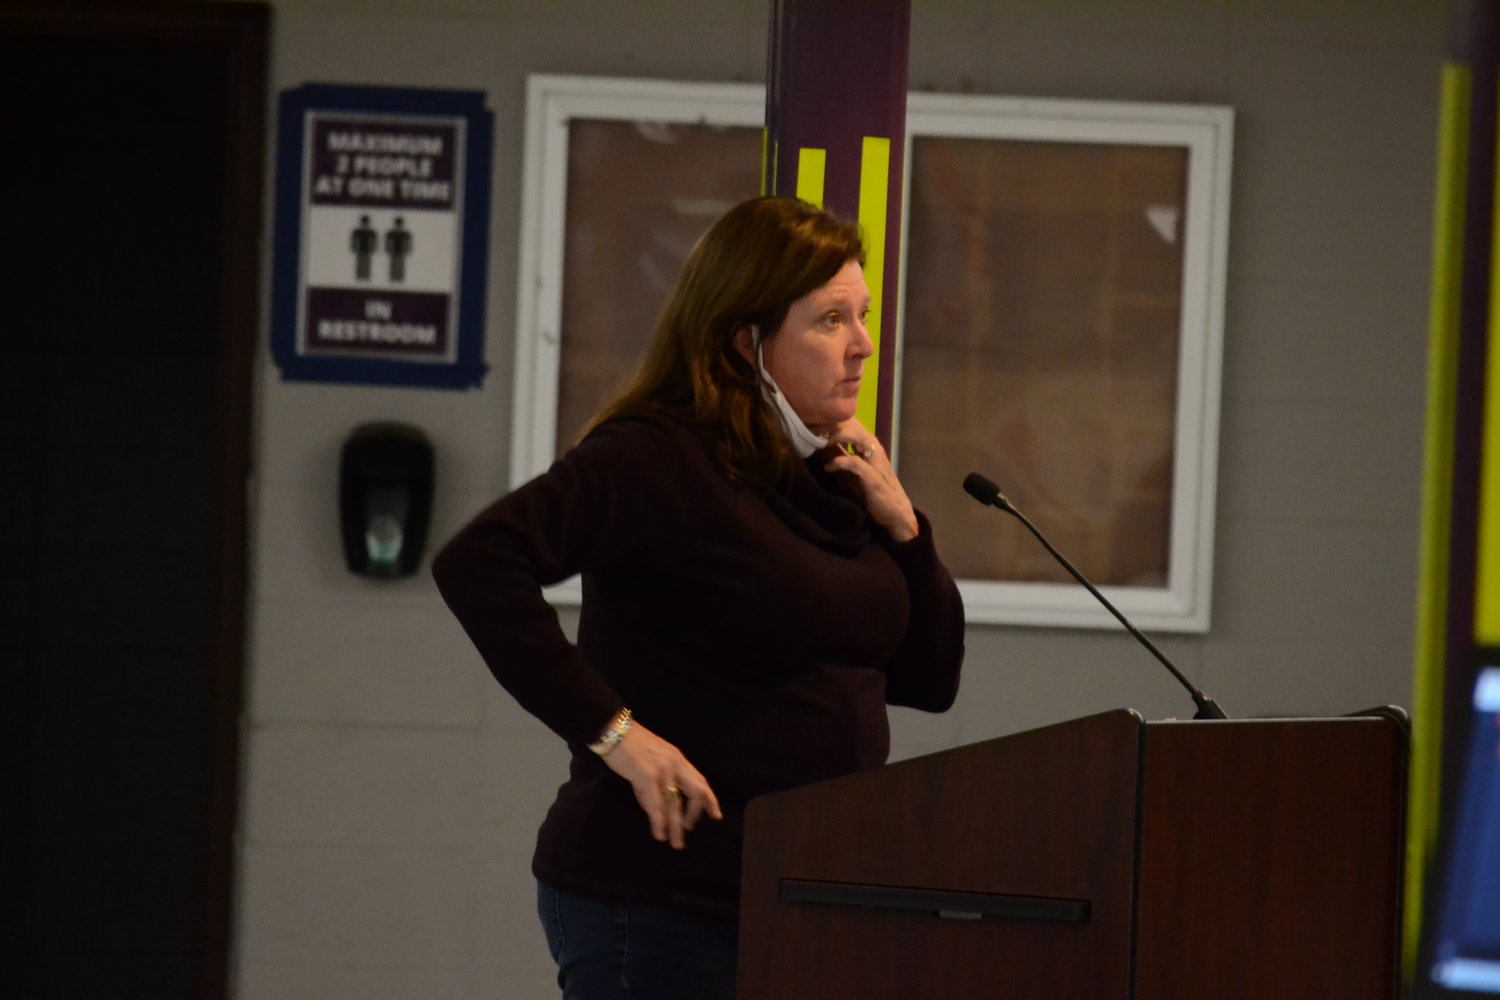 Darcy DaCosta, chair of the Bristol Warren Education Foundation, addressed questions regarding the grant’s funding source on Monday night.